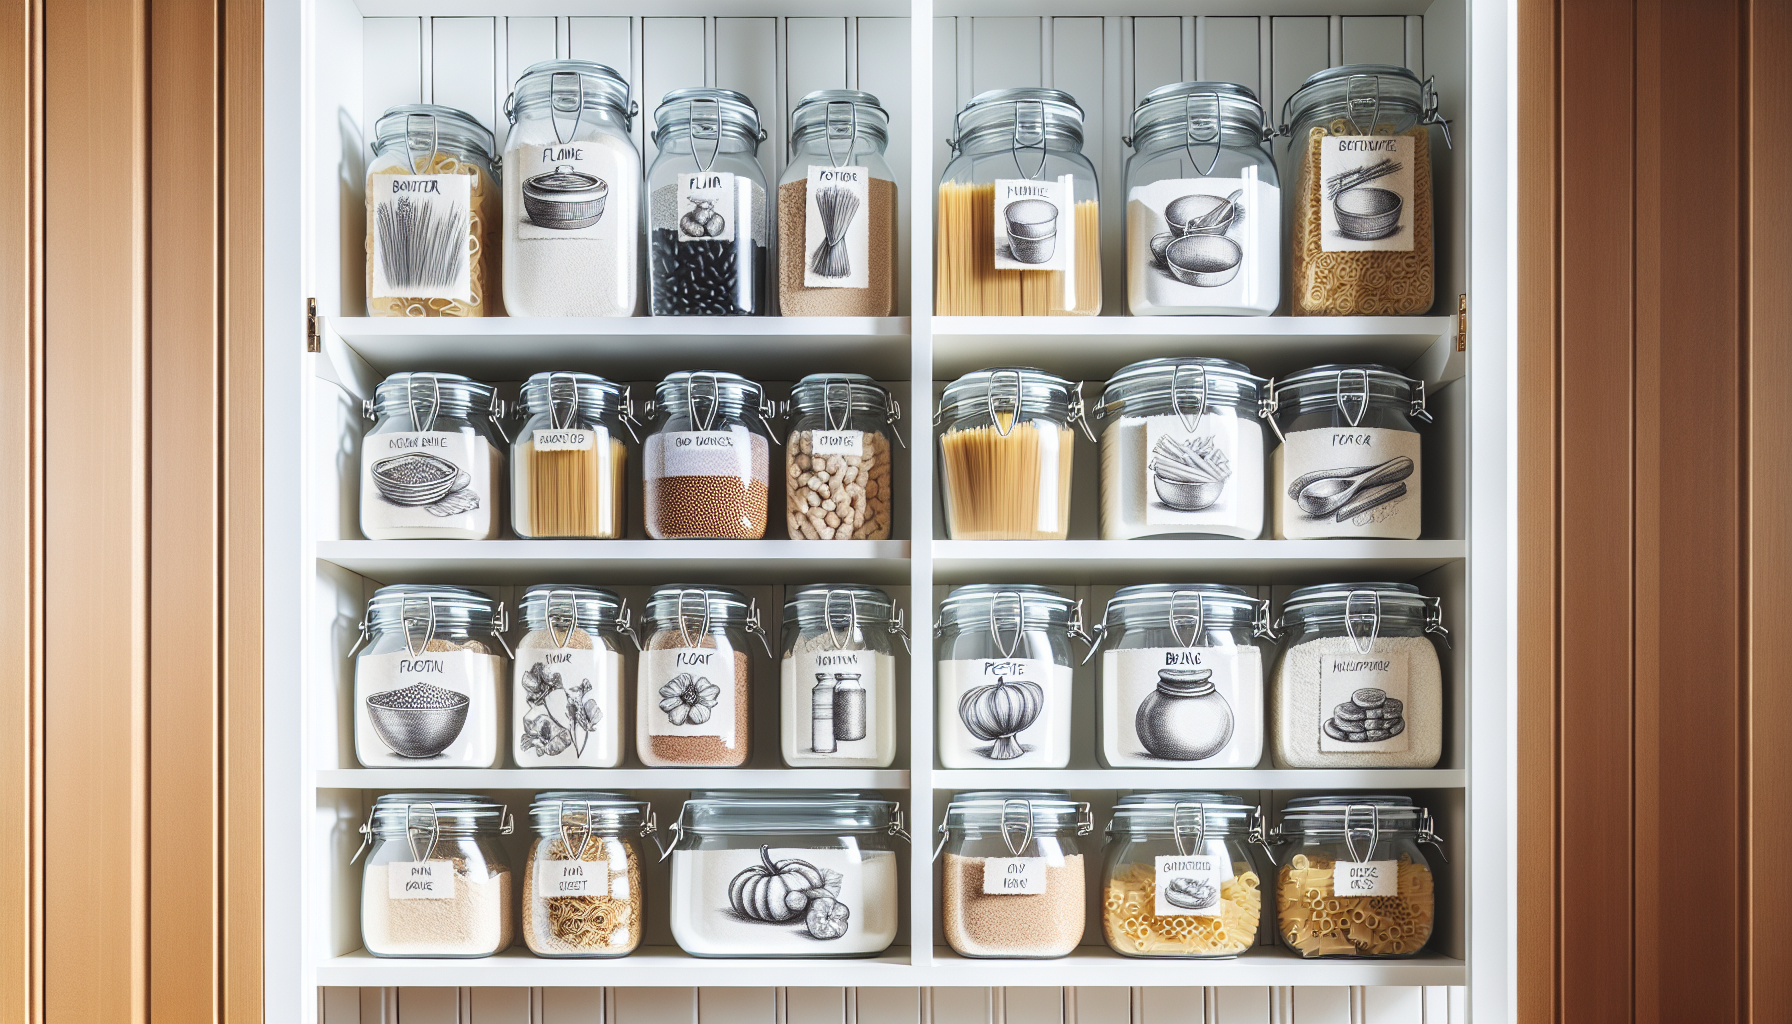 Adding labels to pantry storage containers